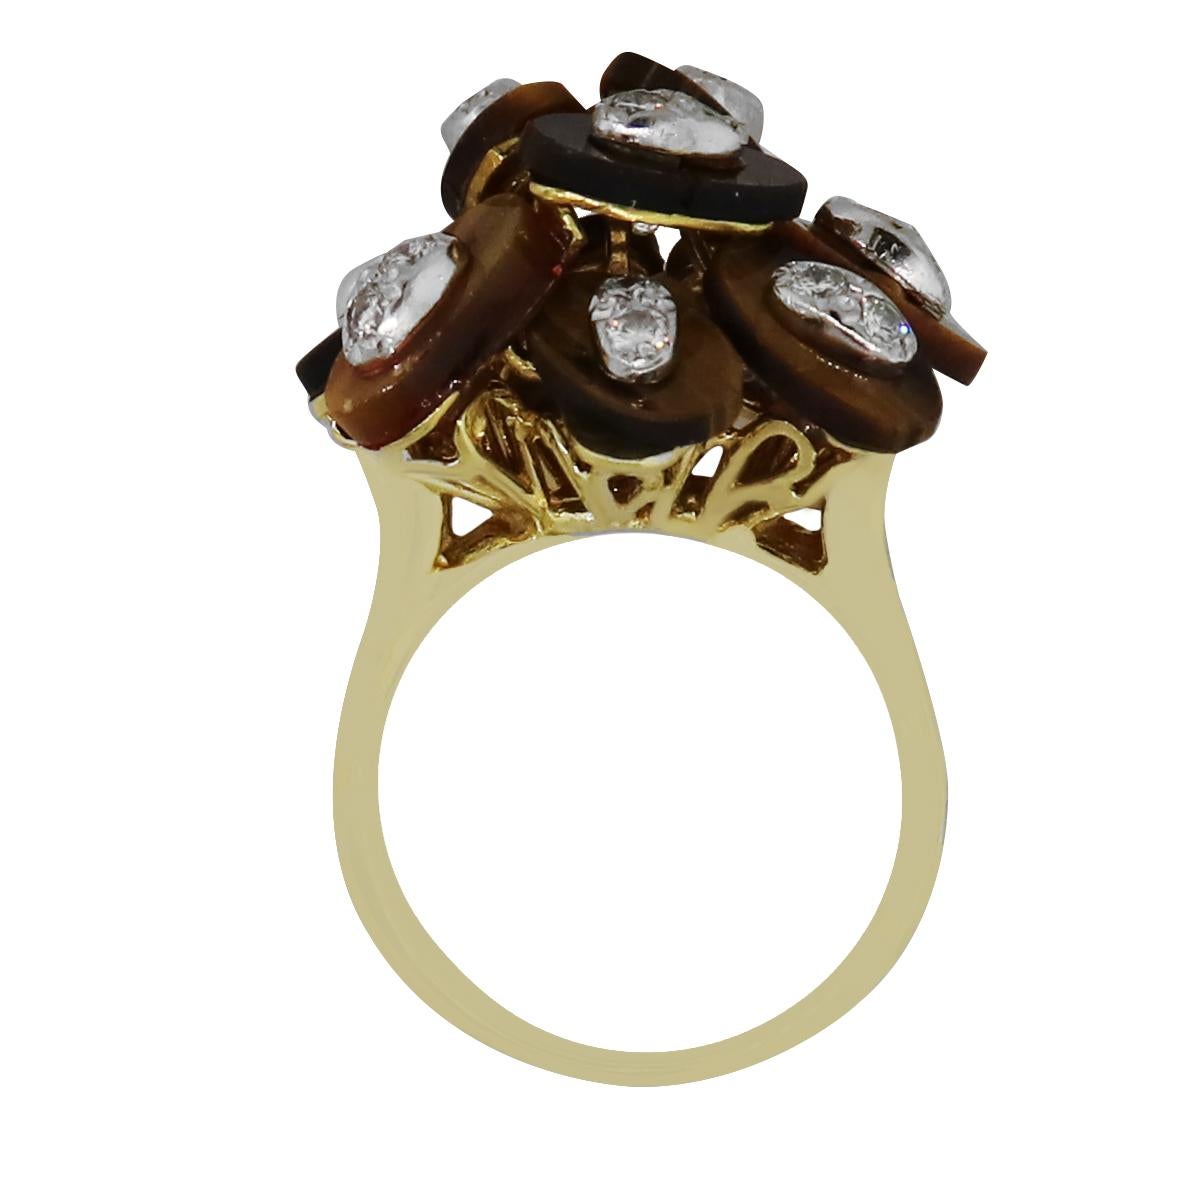 Diamond Tigers Eye Flower Style Ring In Excellent Condition For Sale In Boca Raton, FL